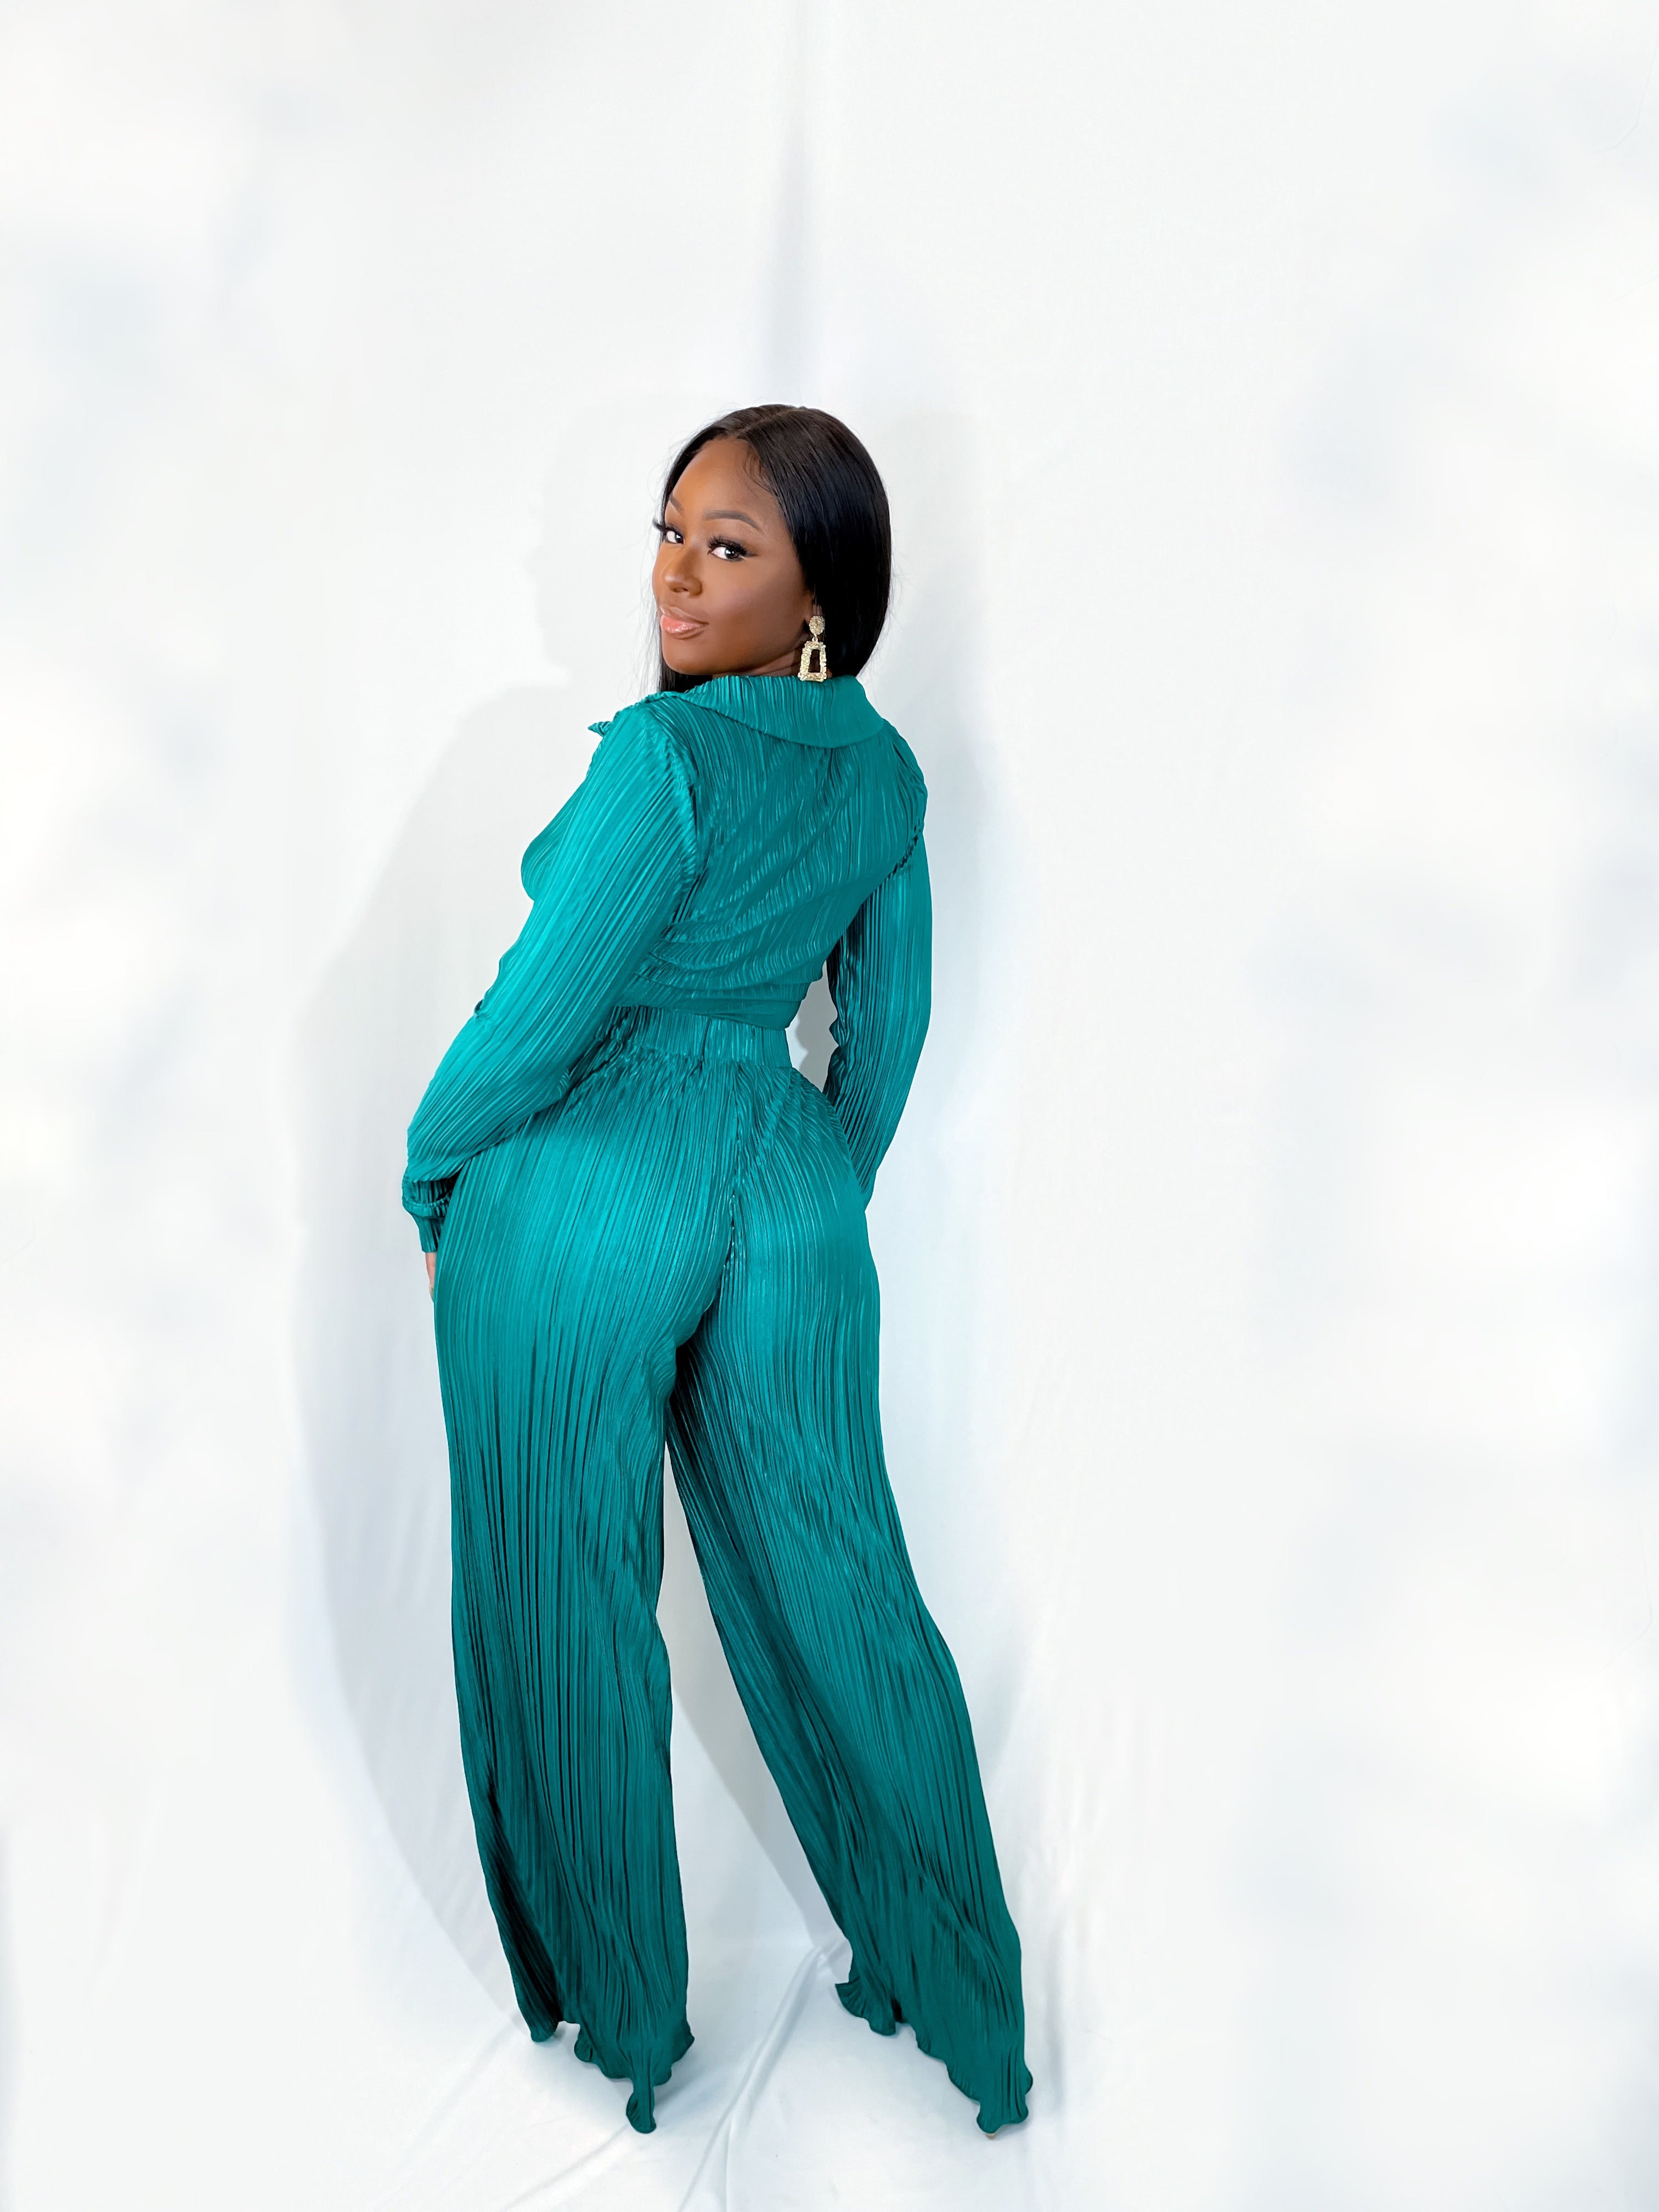 You will be the center of attention in this beautiful casual Living Over The Top Pants Set (Green). The pleated front tie crop top and high-waisted pants set are perfect for dinner, a girl's night out, or a special occasion and is guaranteed to get you noticed. Coming in a shiny emerald green color, it features a straight hem, long sleeves, and an elastic band on the waist giving you a refined look no matter where you may be.